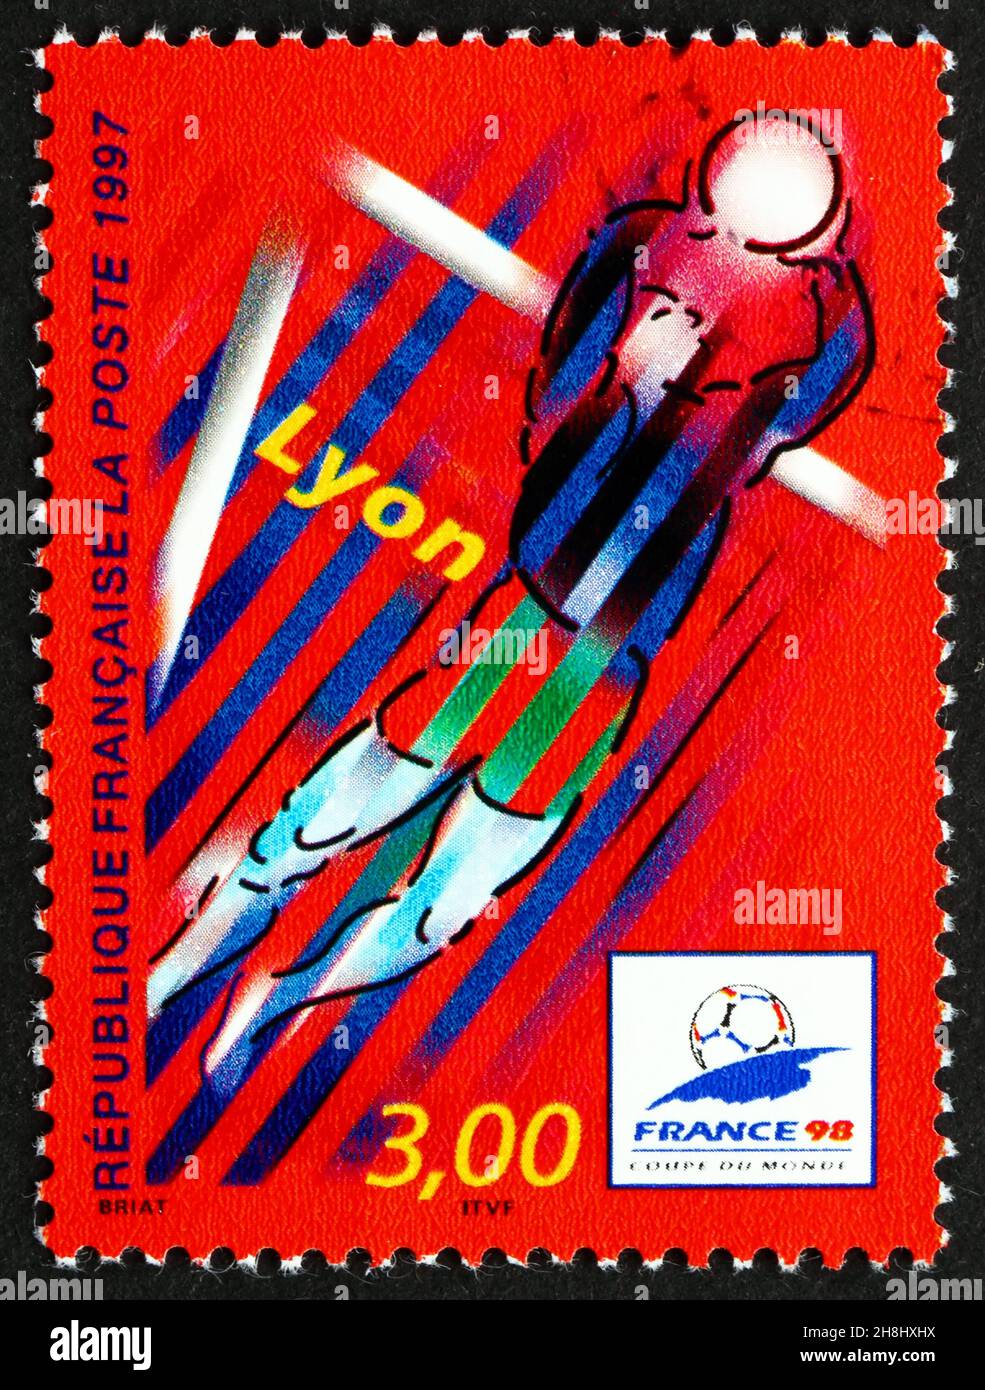 FRANCE - CIRCA 1997: a stamp printed in the France shows Lyon, Host City of 1998 World Cup Soccer Championships, Stylized Action Scene, circa 1997 Stock Photo